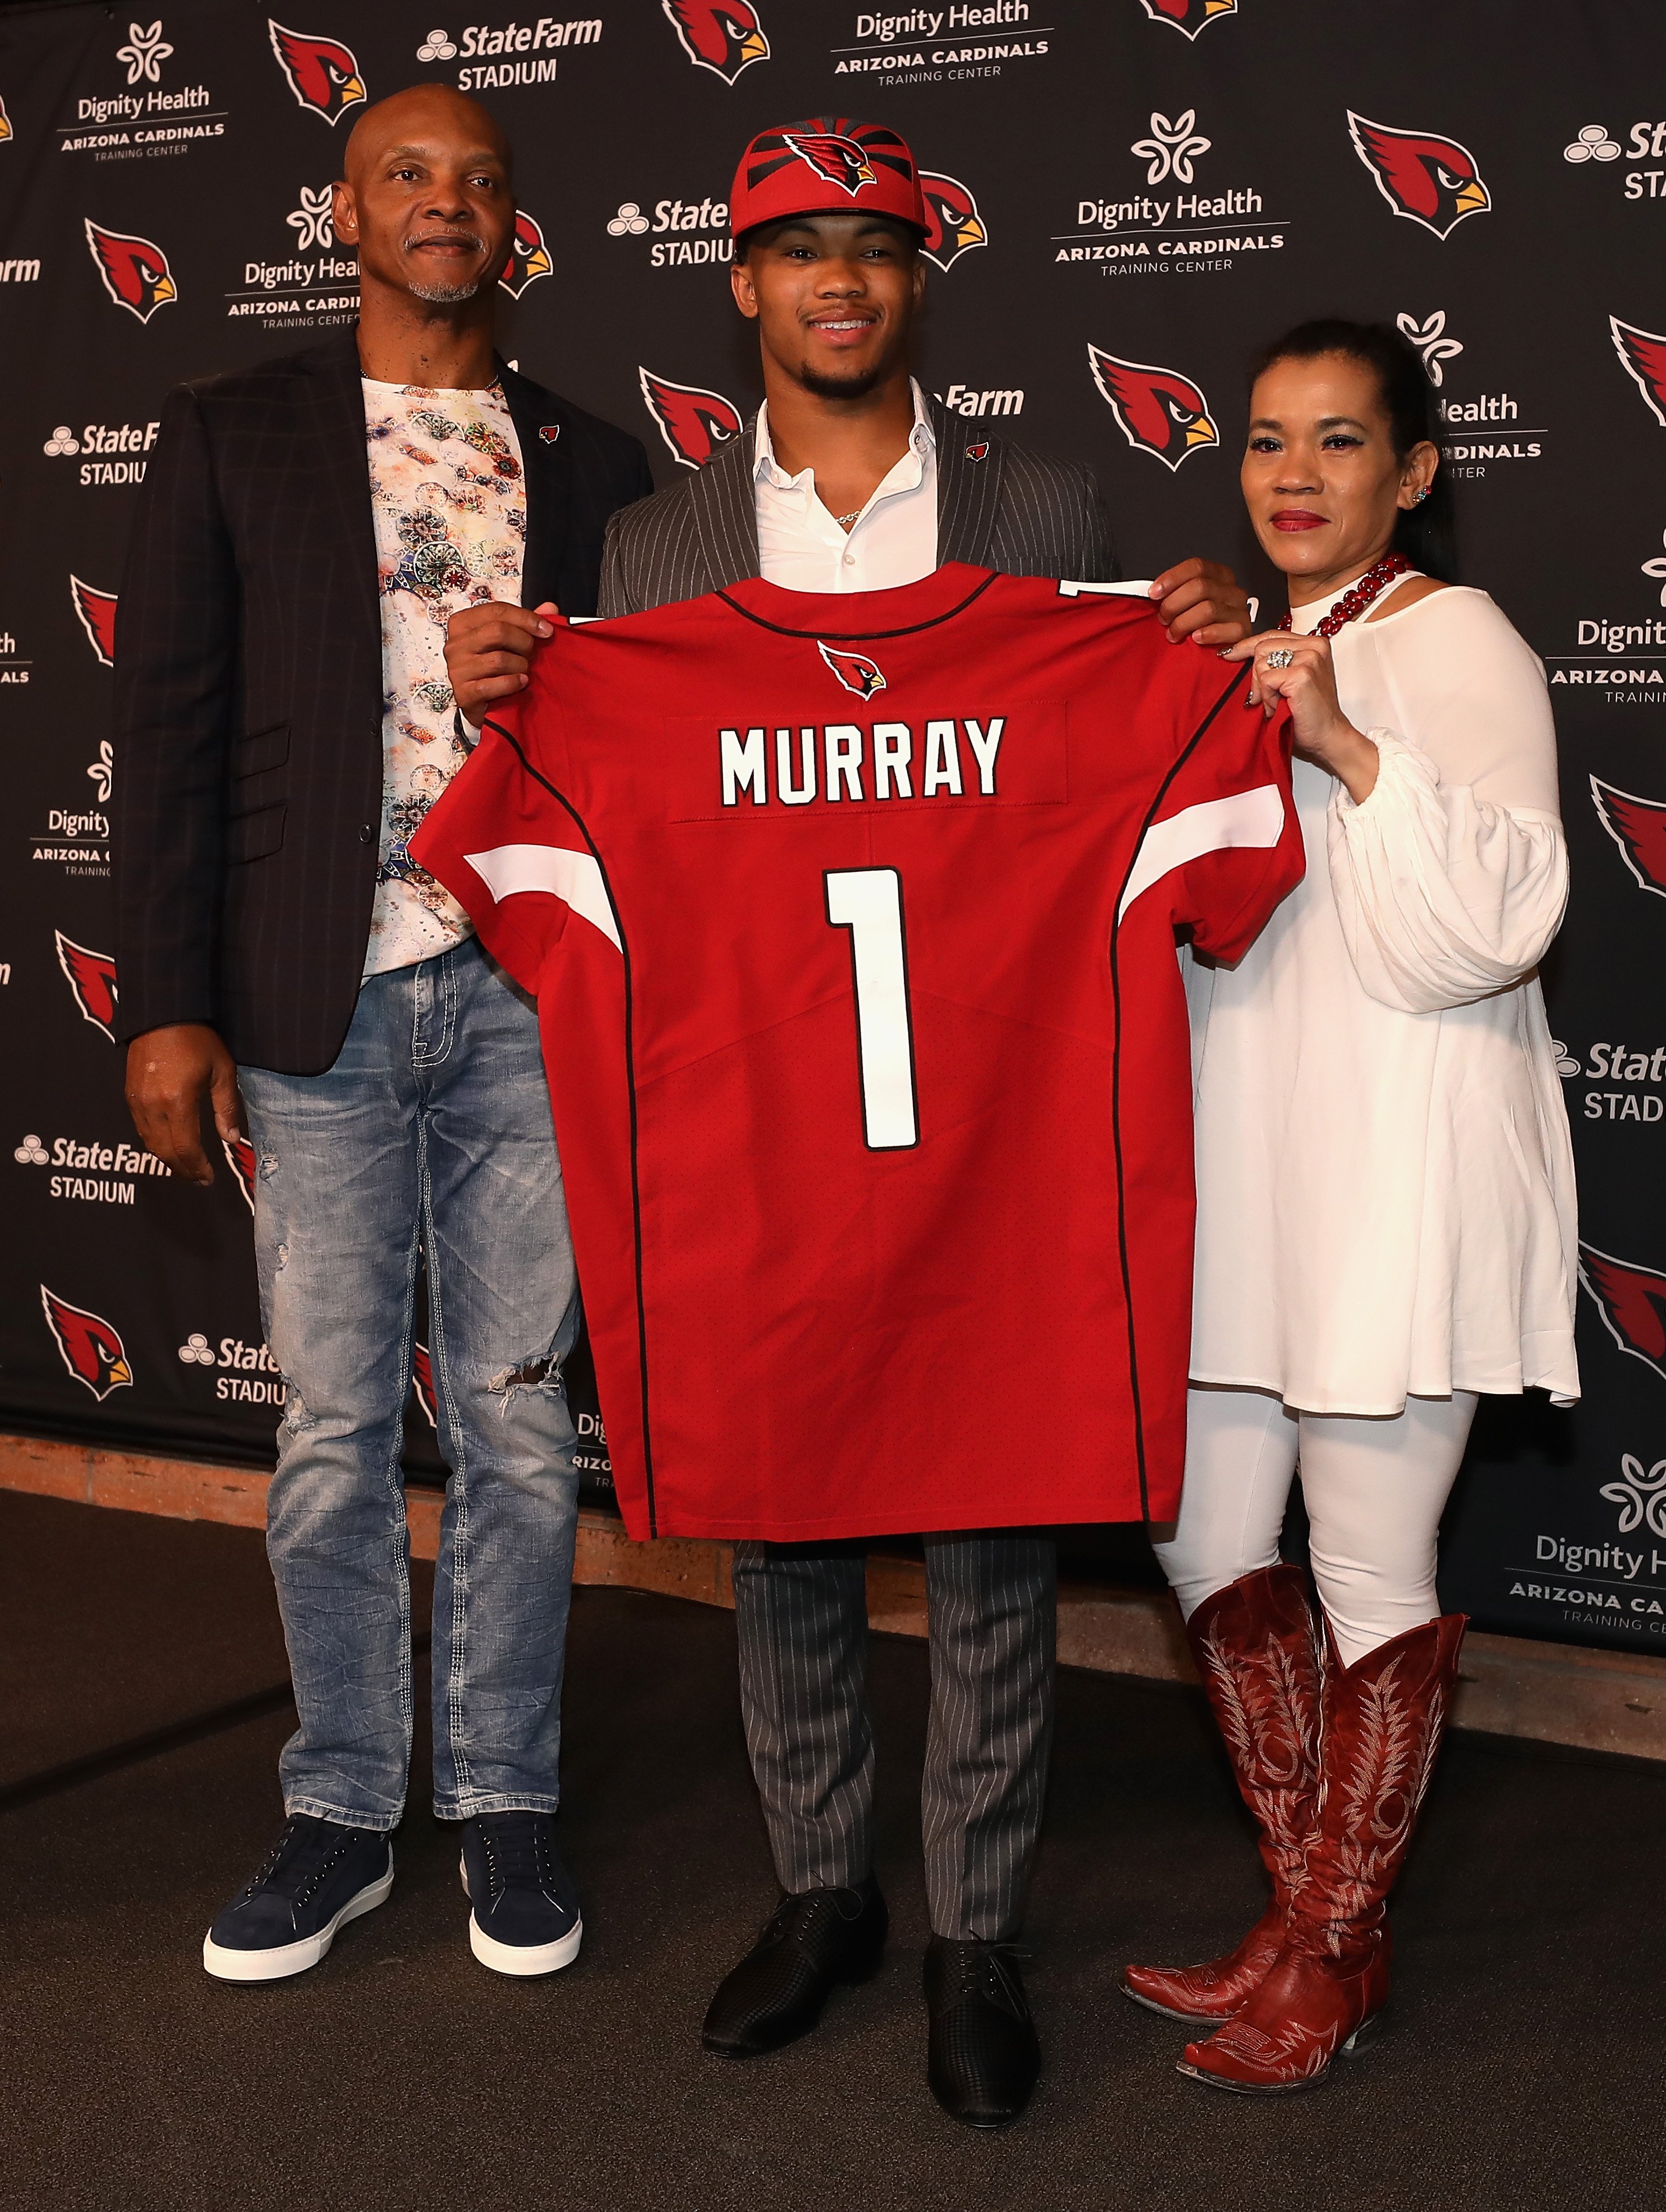 Quarterback Kyler Murray of the Arizona Cardinals poses with father Kevin and mother Missy during a press conference at the Dignity Health Arizona Cardinals Training Center on April 26, 2019 in Tempe, Arizona. | Source: Getty Images